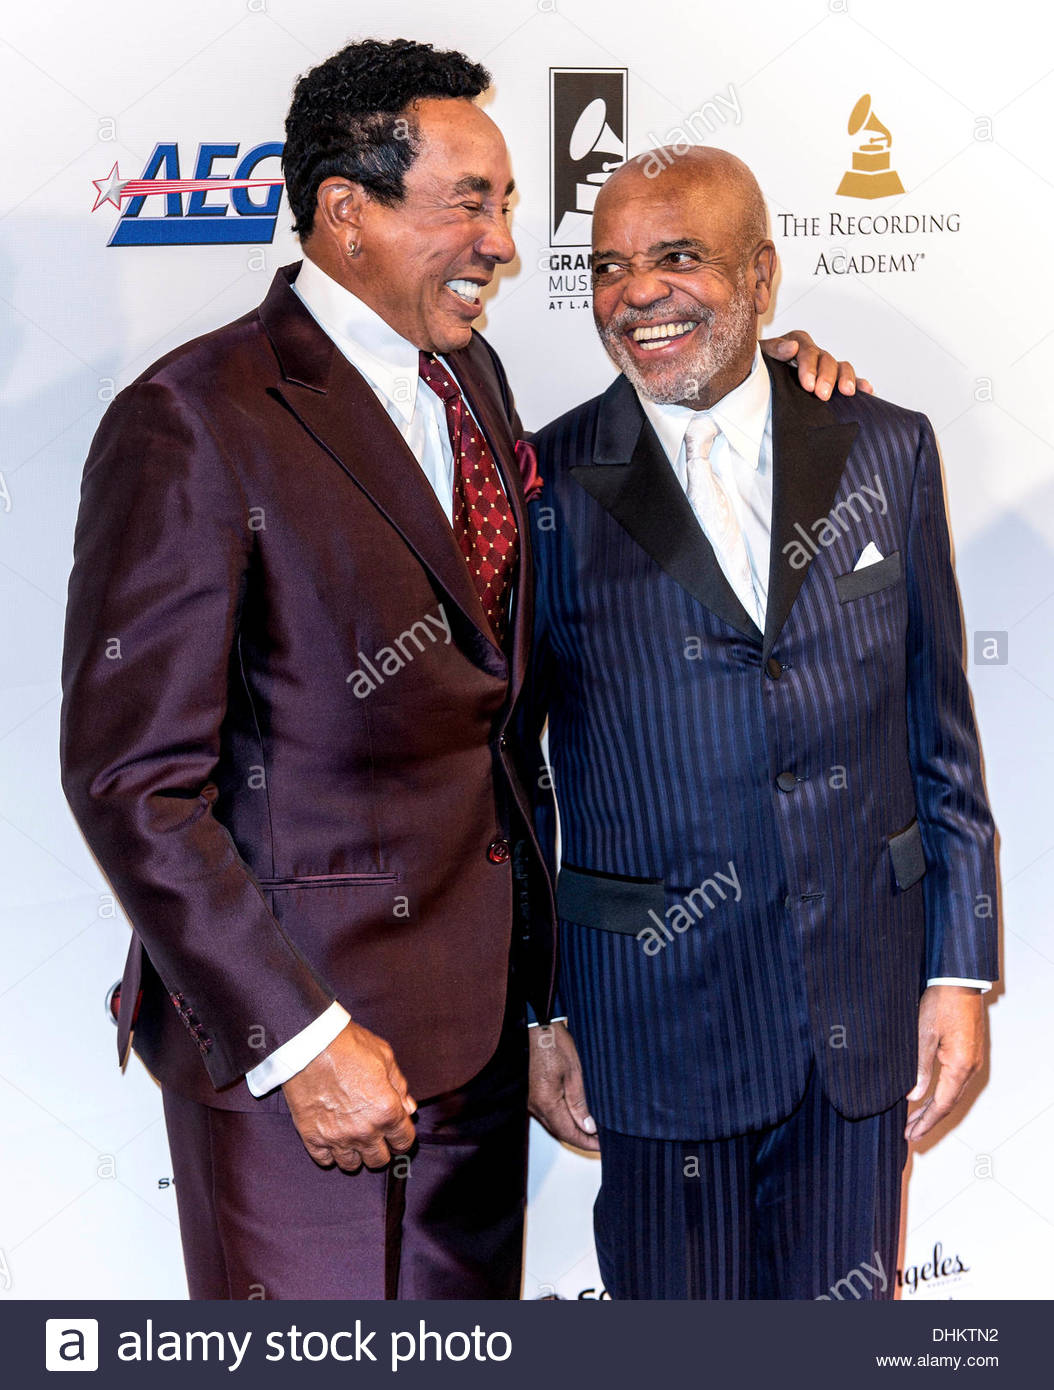 Image result for berry gordy 2013